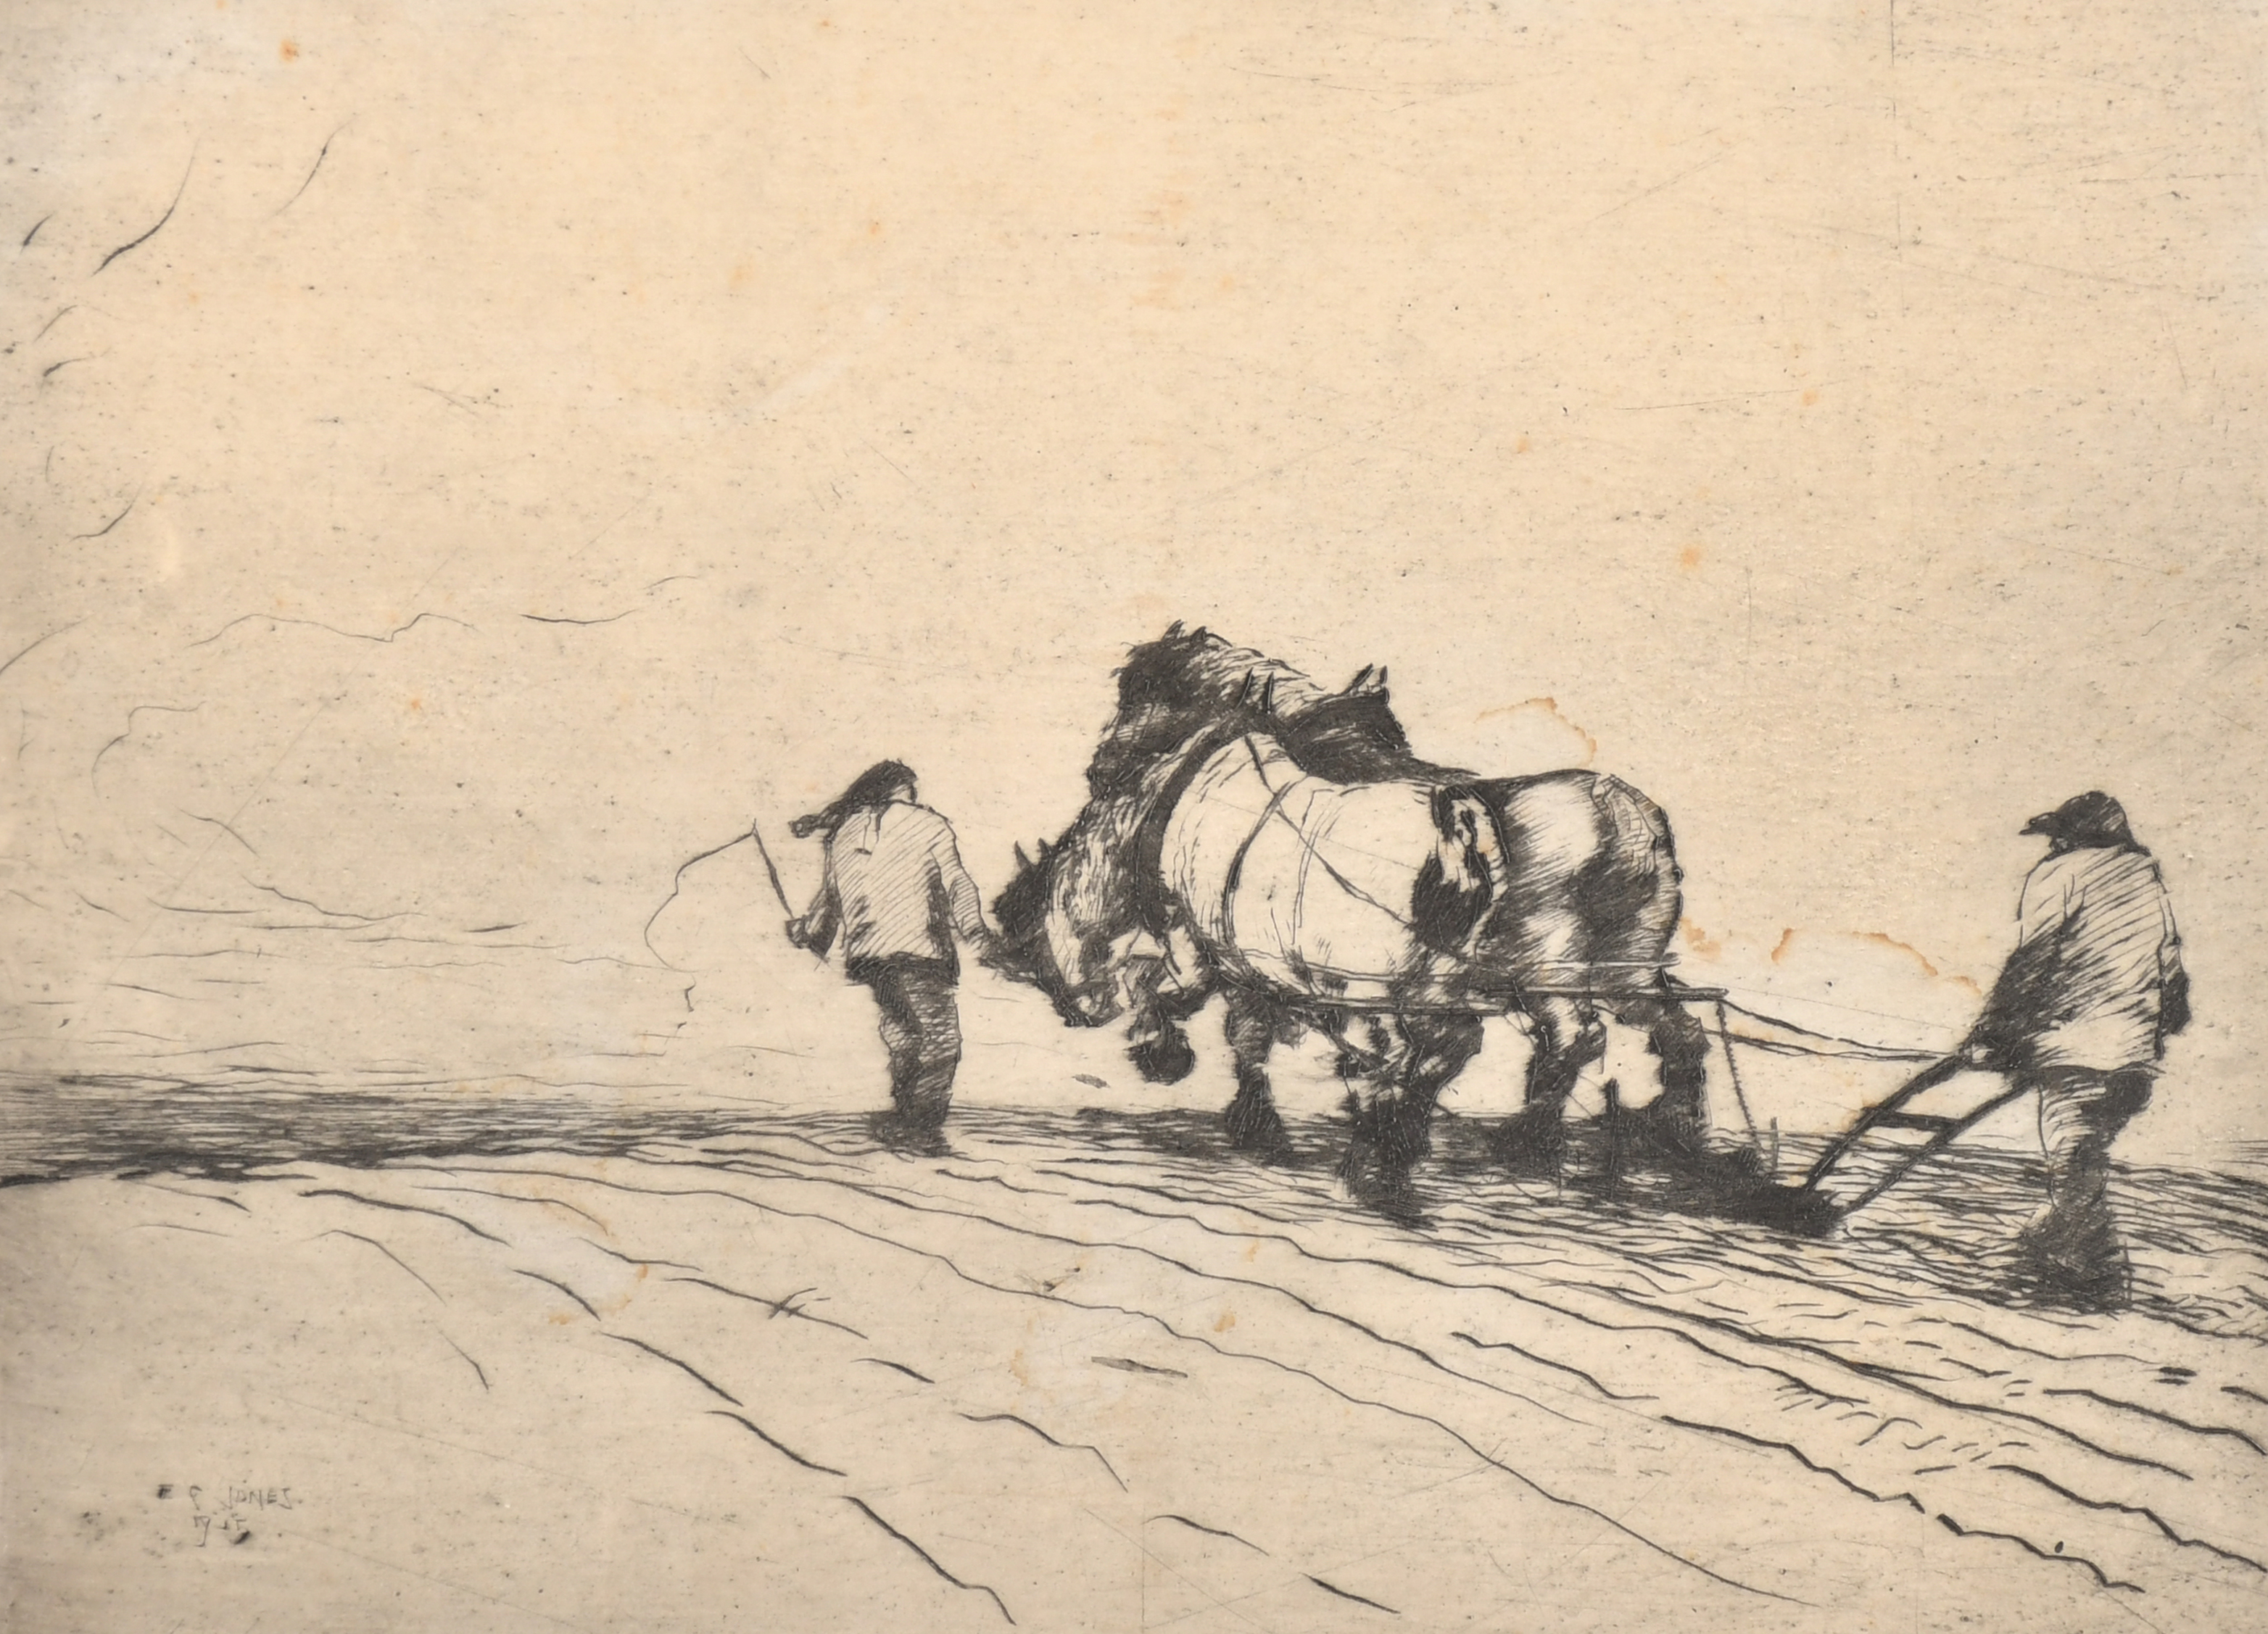 F Jones (19th Century) British. "Ploughing", Drypoint, Inscribed in pencil, unframed 6" x 8" (15.2 x